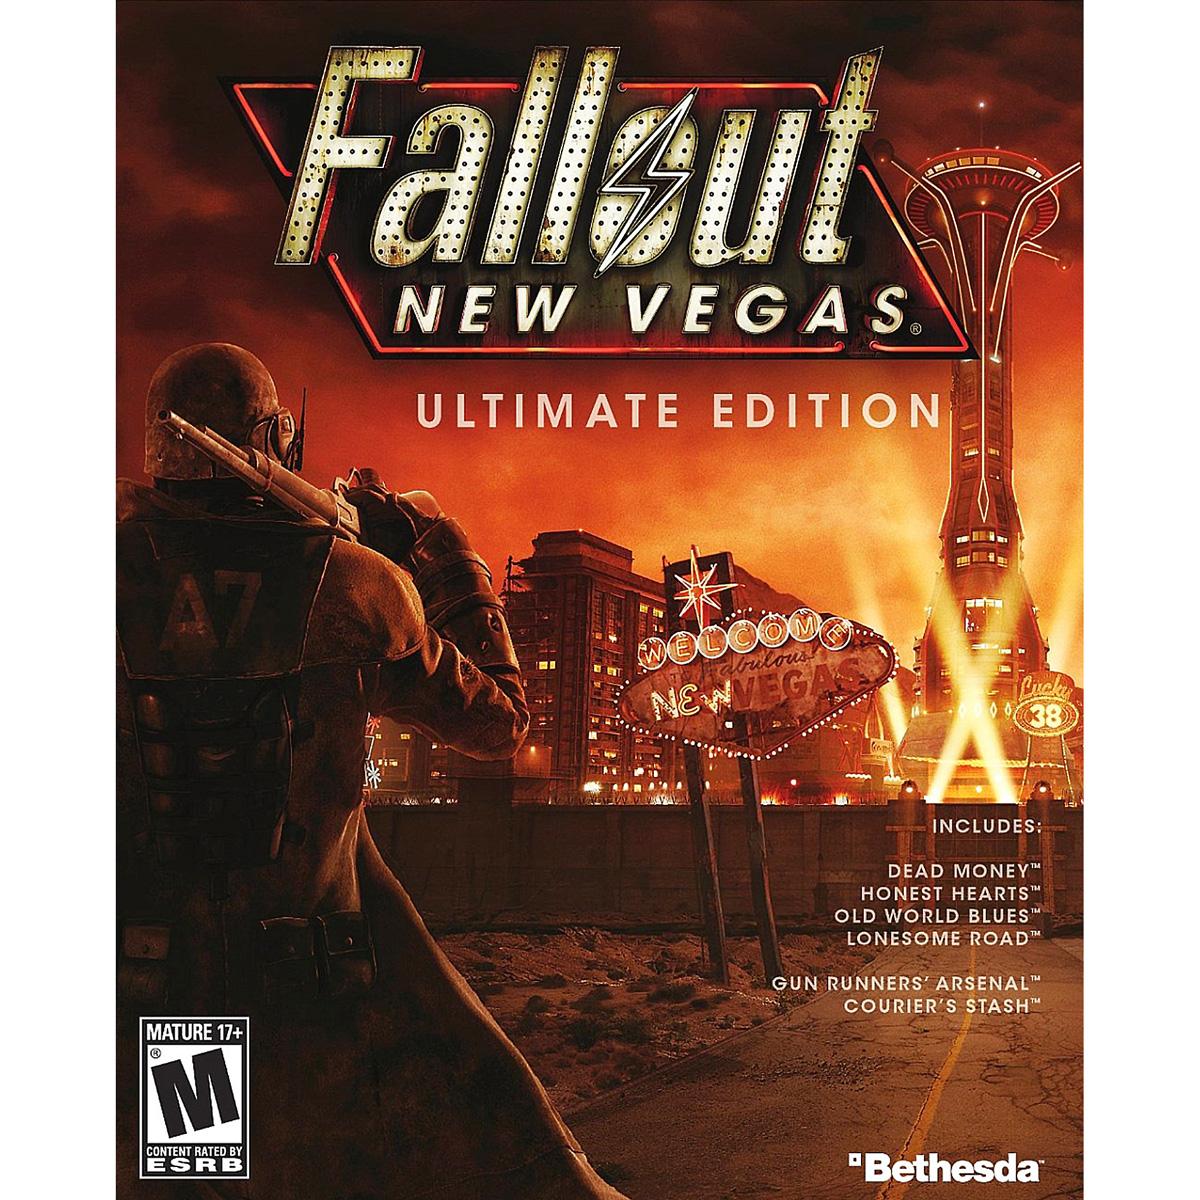 Fallout New Vegas Ultimate Edition PC Download for $5.43